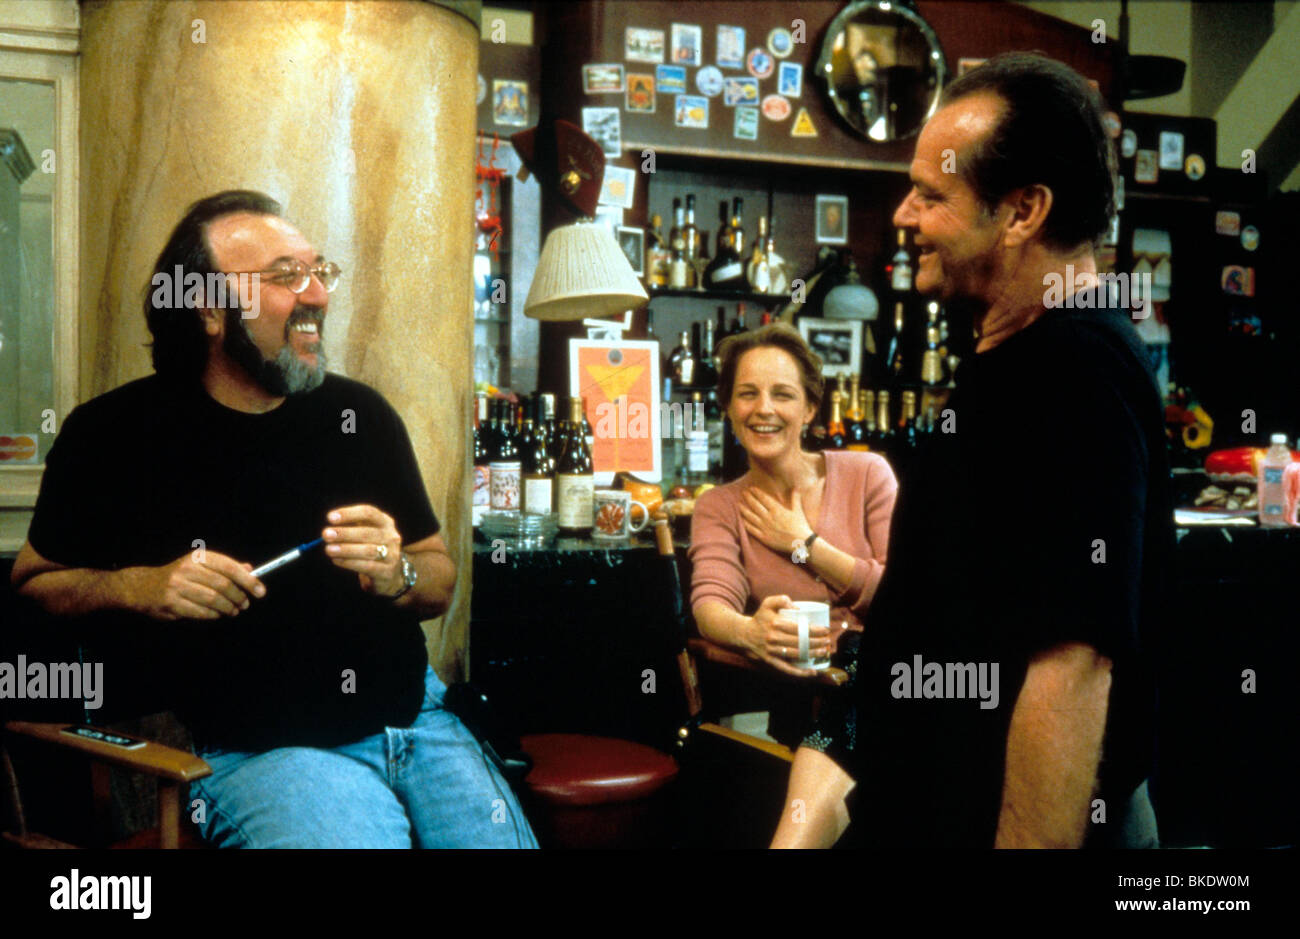 JACK NICHOLSON O/S 'AS GOOD AS IT GETS' (1998) WITH JAMES L BROOKS (DIR) AND HELEN HUNT NCHL 011 Stock Photo